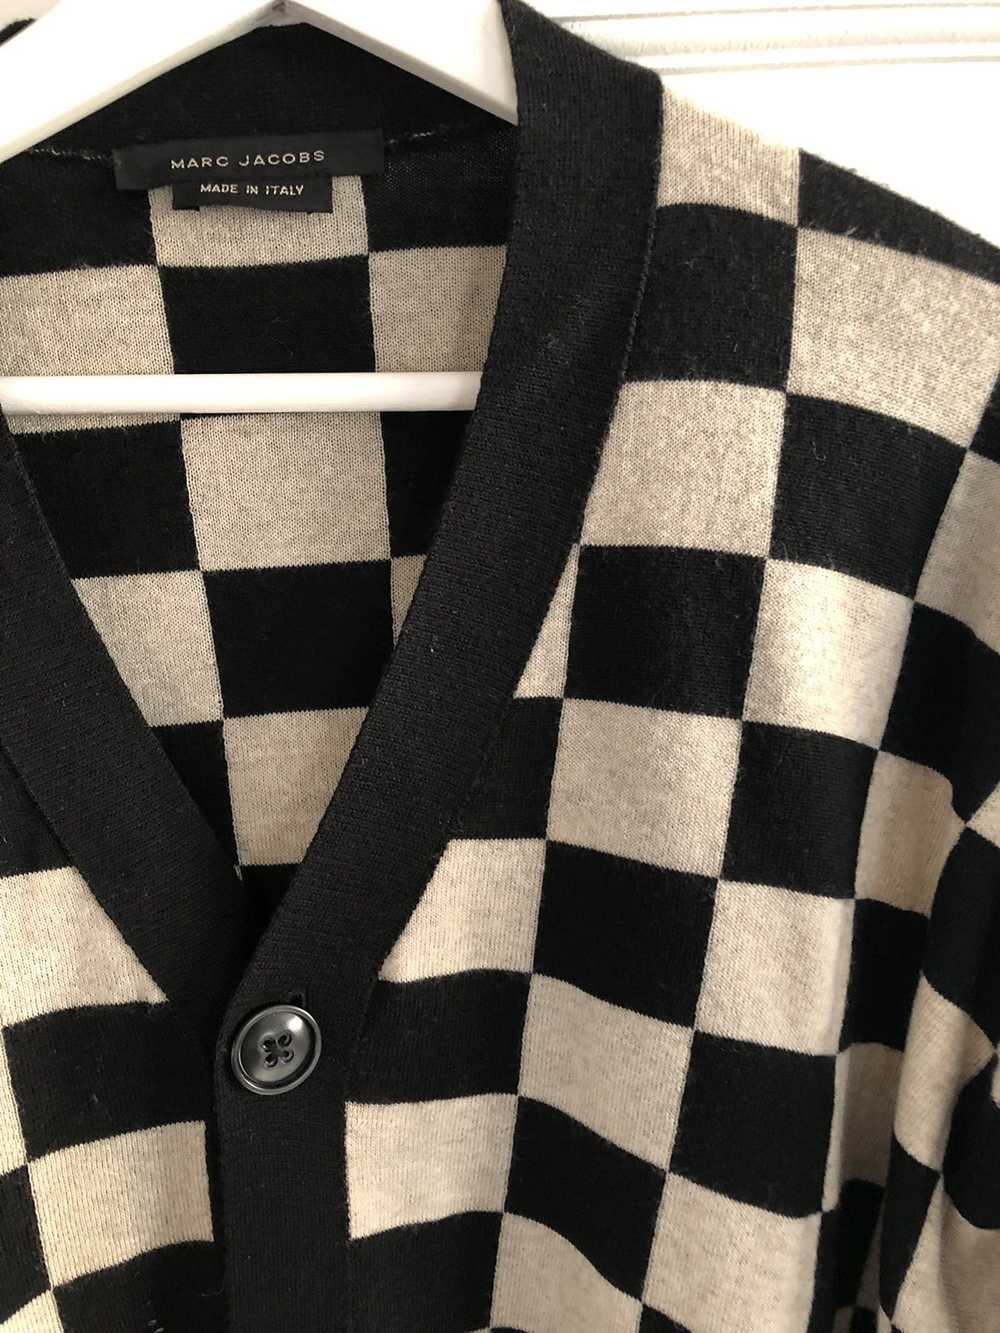 Marc Jacobs Marc Jacobs checkered cardigan - image 2